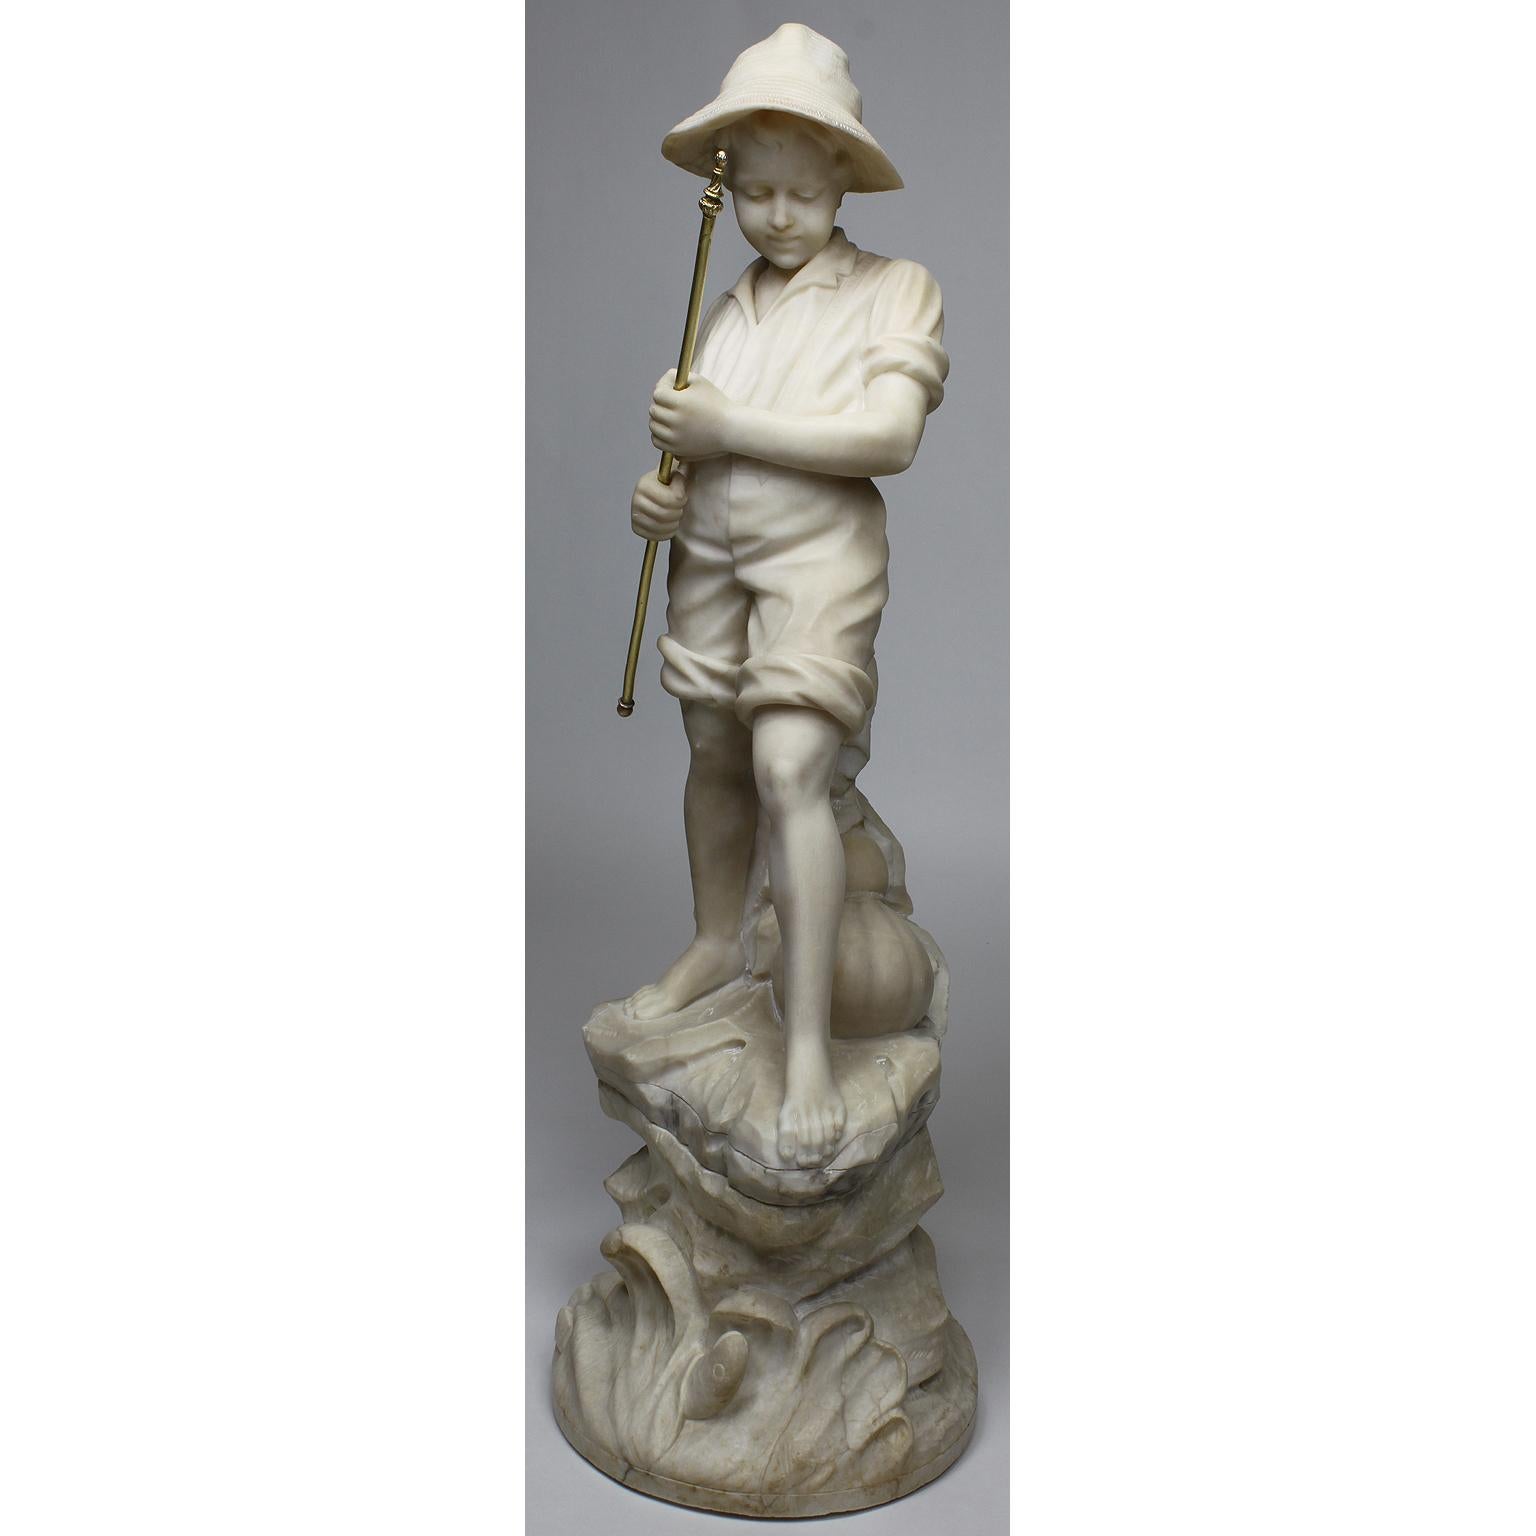 A charming Italian 19th-20th century carved alabaster figure of a fisher boy. The young boy wearing a blouse, with his pant legs rolled up to his knees and a straw hat, standing on a Rocky Outcrop and holding a gilt metal fishing rod. Unsigned,